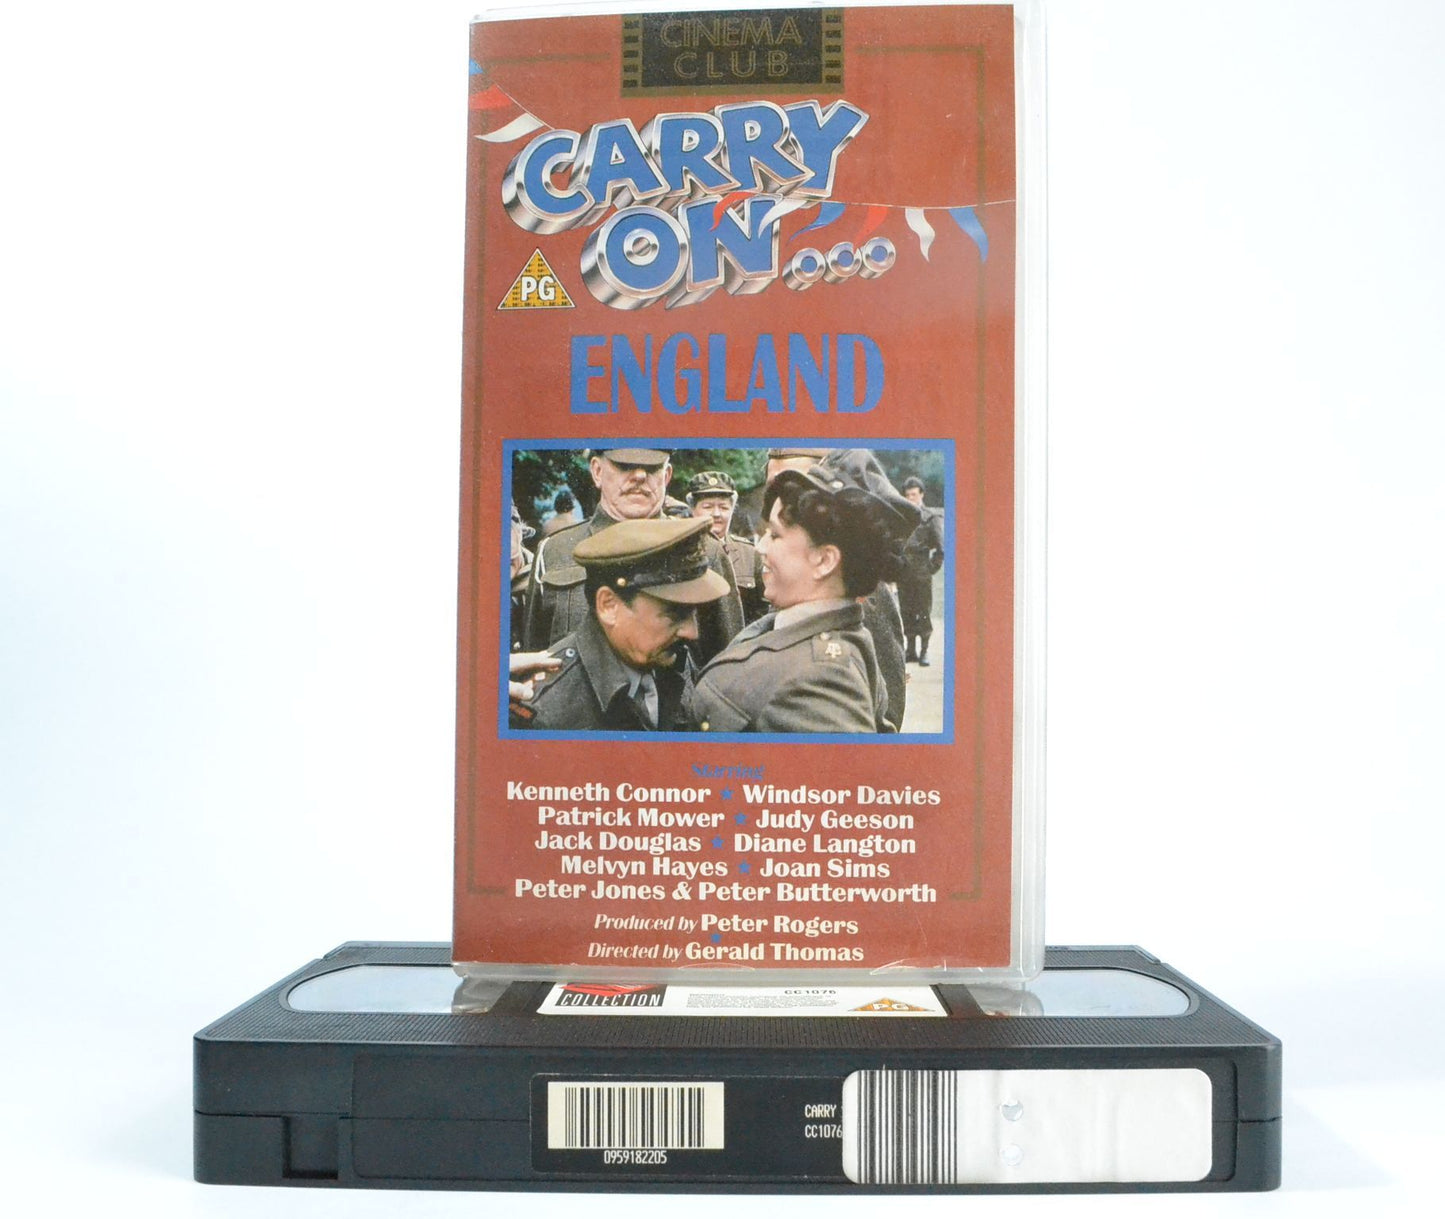 Carry On England (1976): Comedy/Farce - Kenneth Connor - Windsor Davies - VHS-